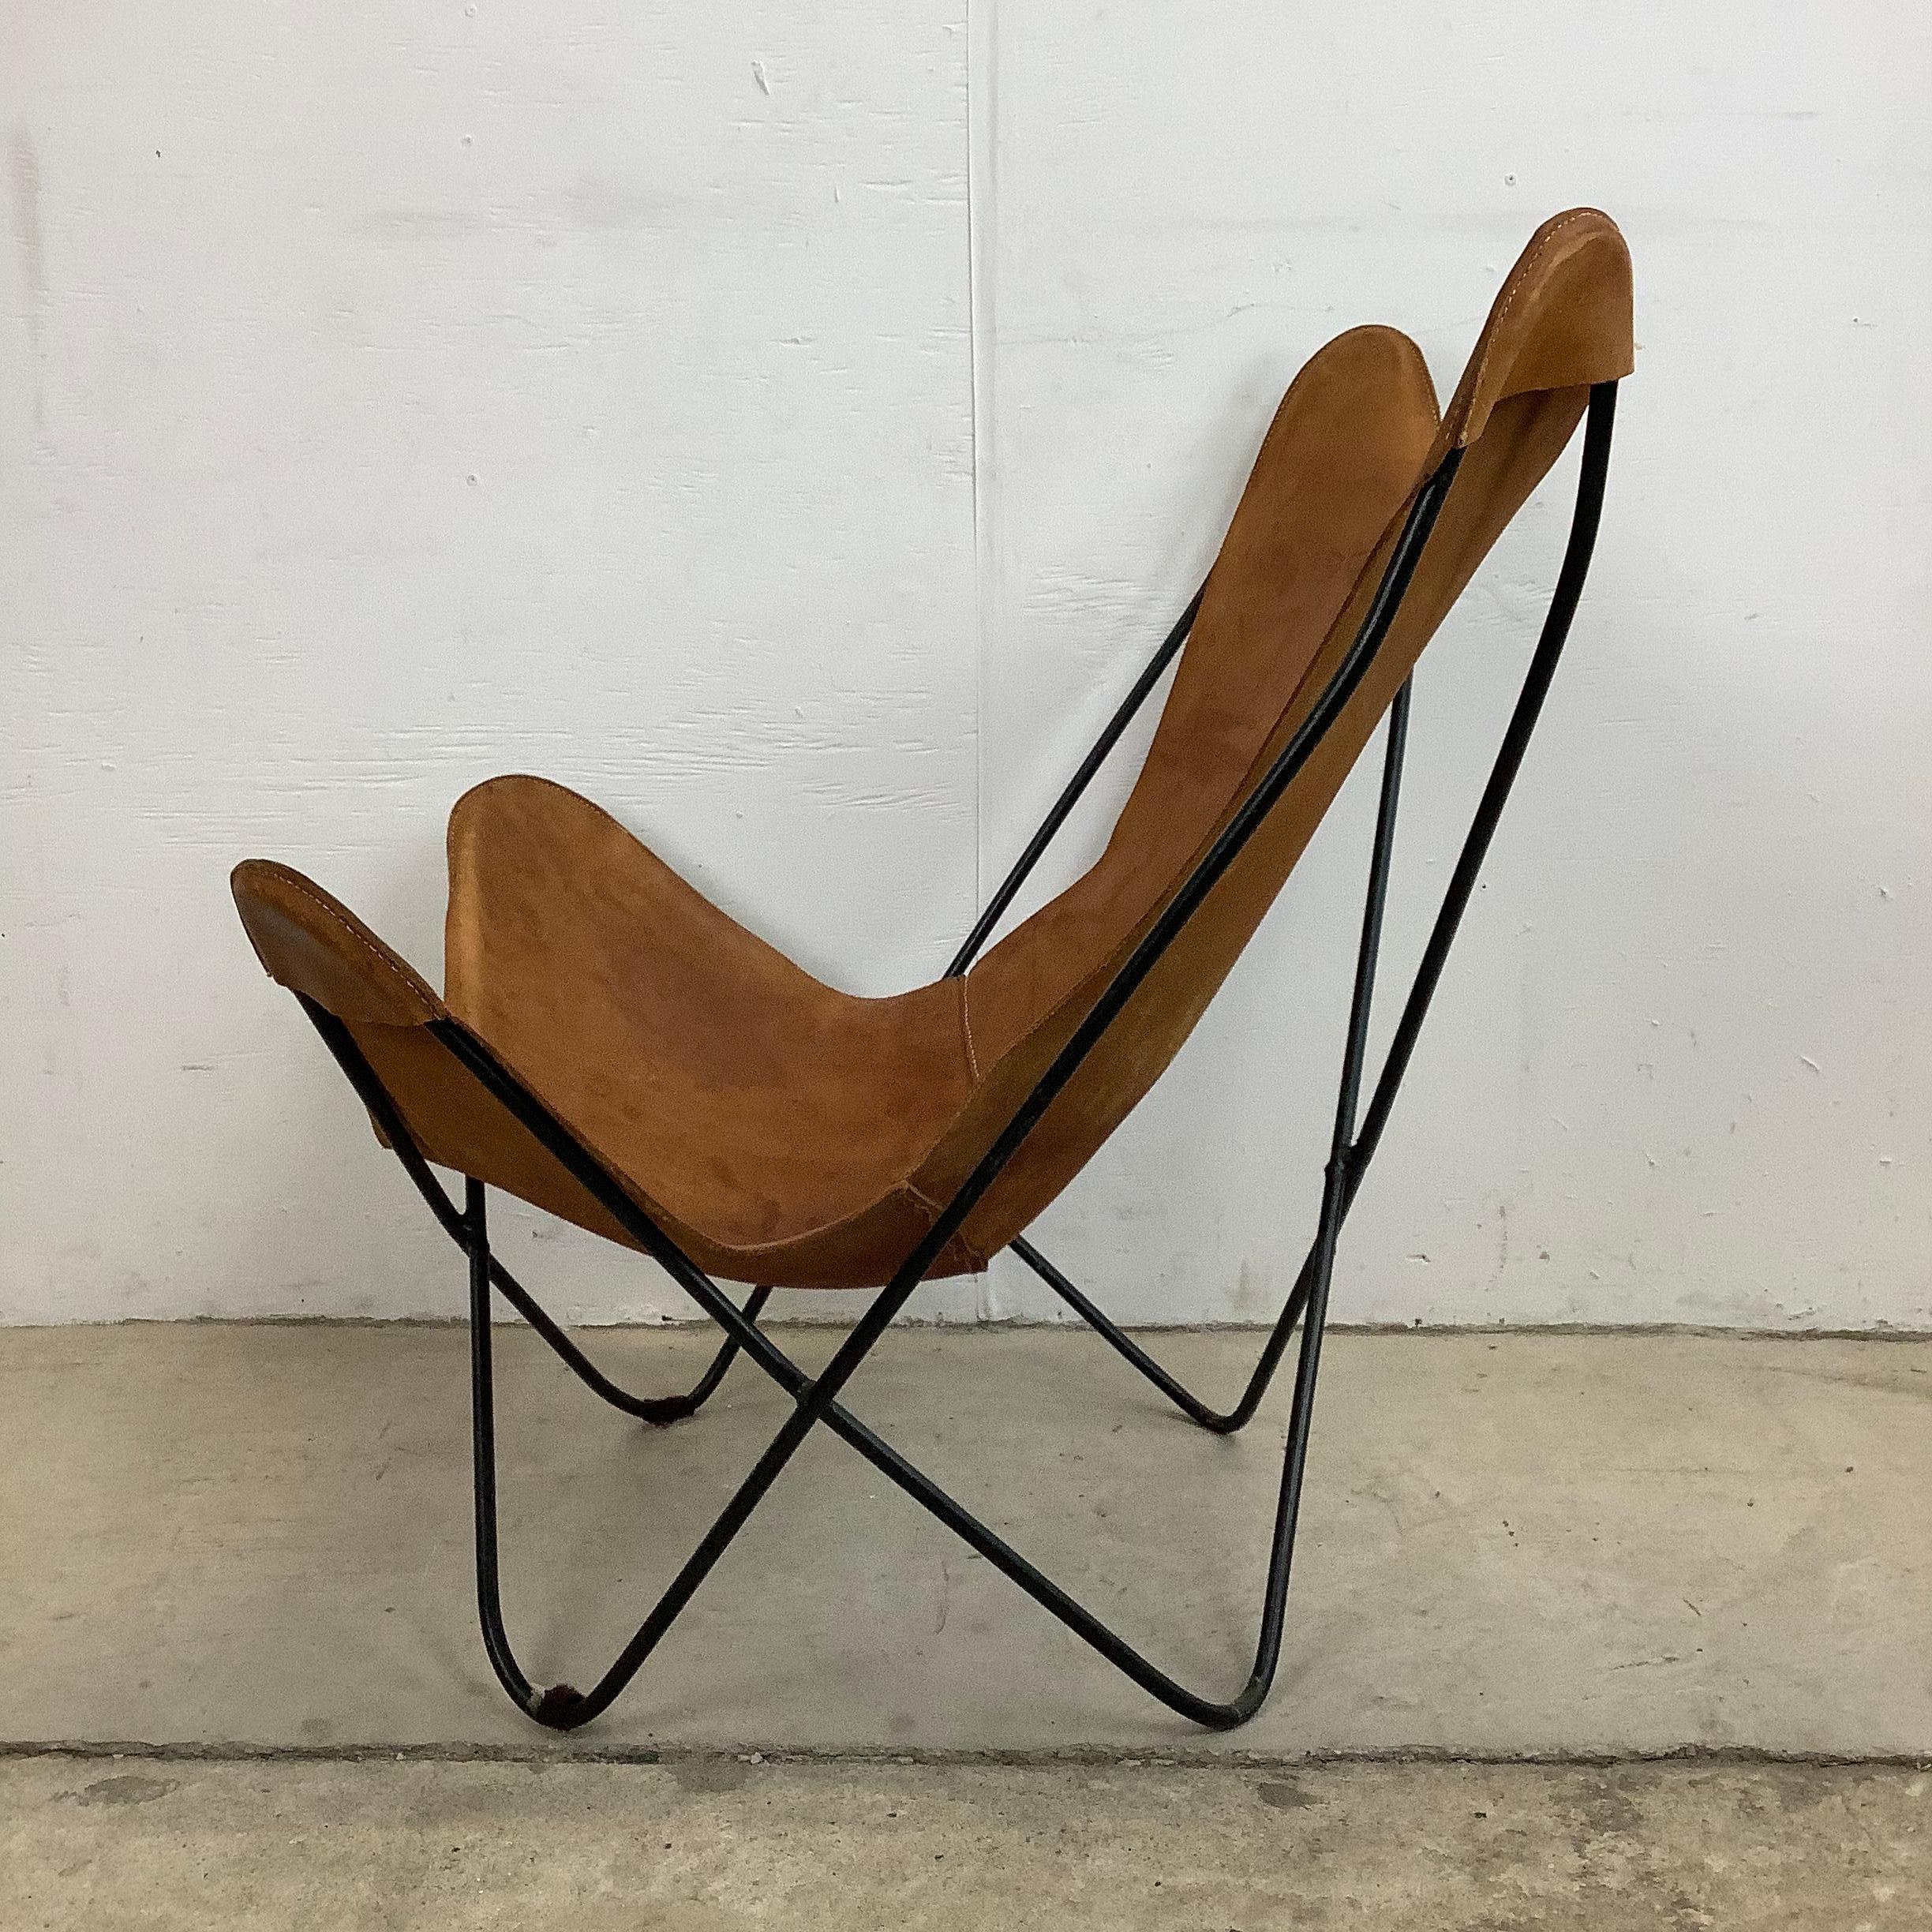 Patinated Vintage Modern Butterfly Chair With Iron Frame And Leather Seat